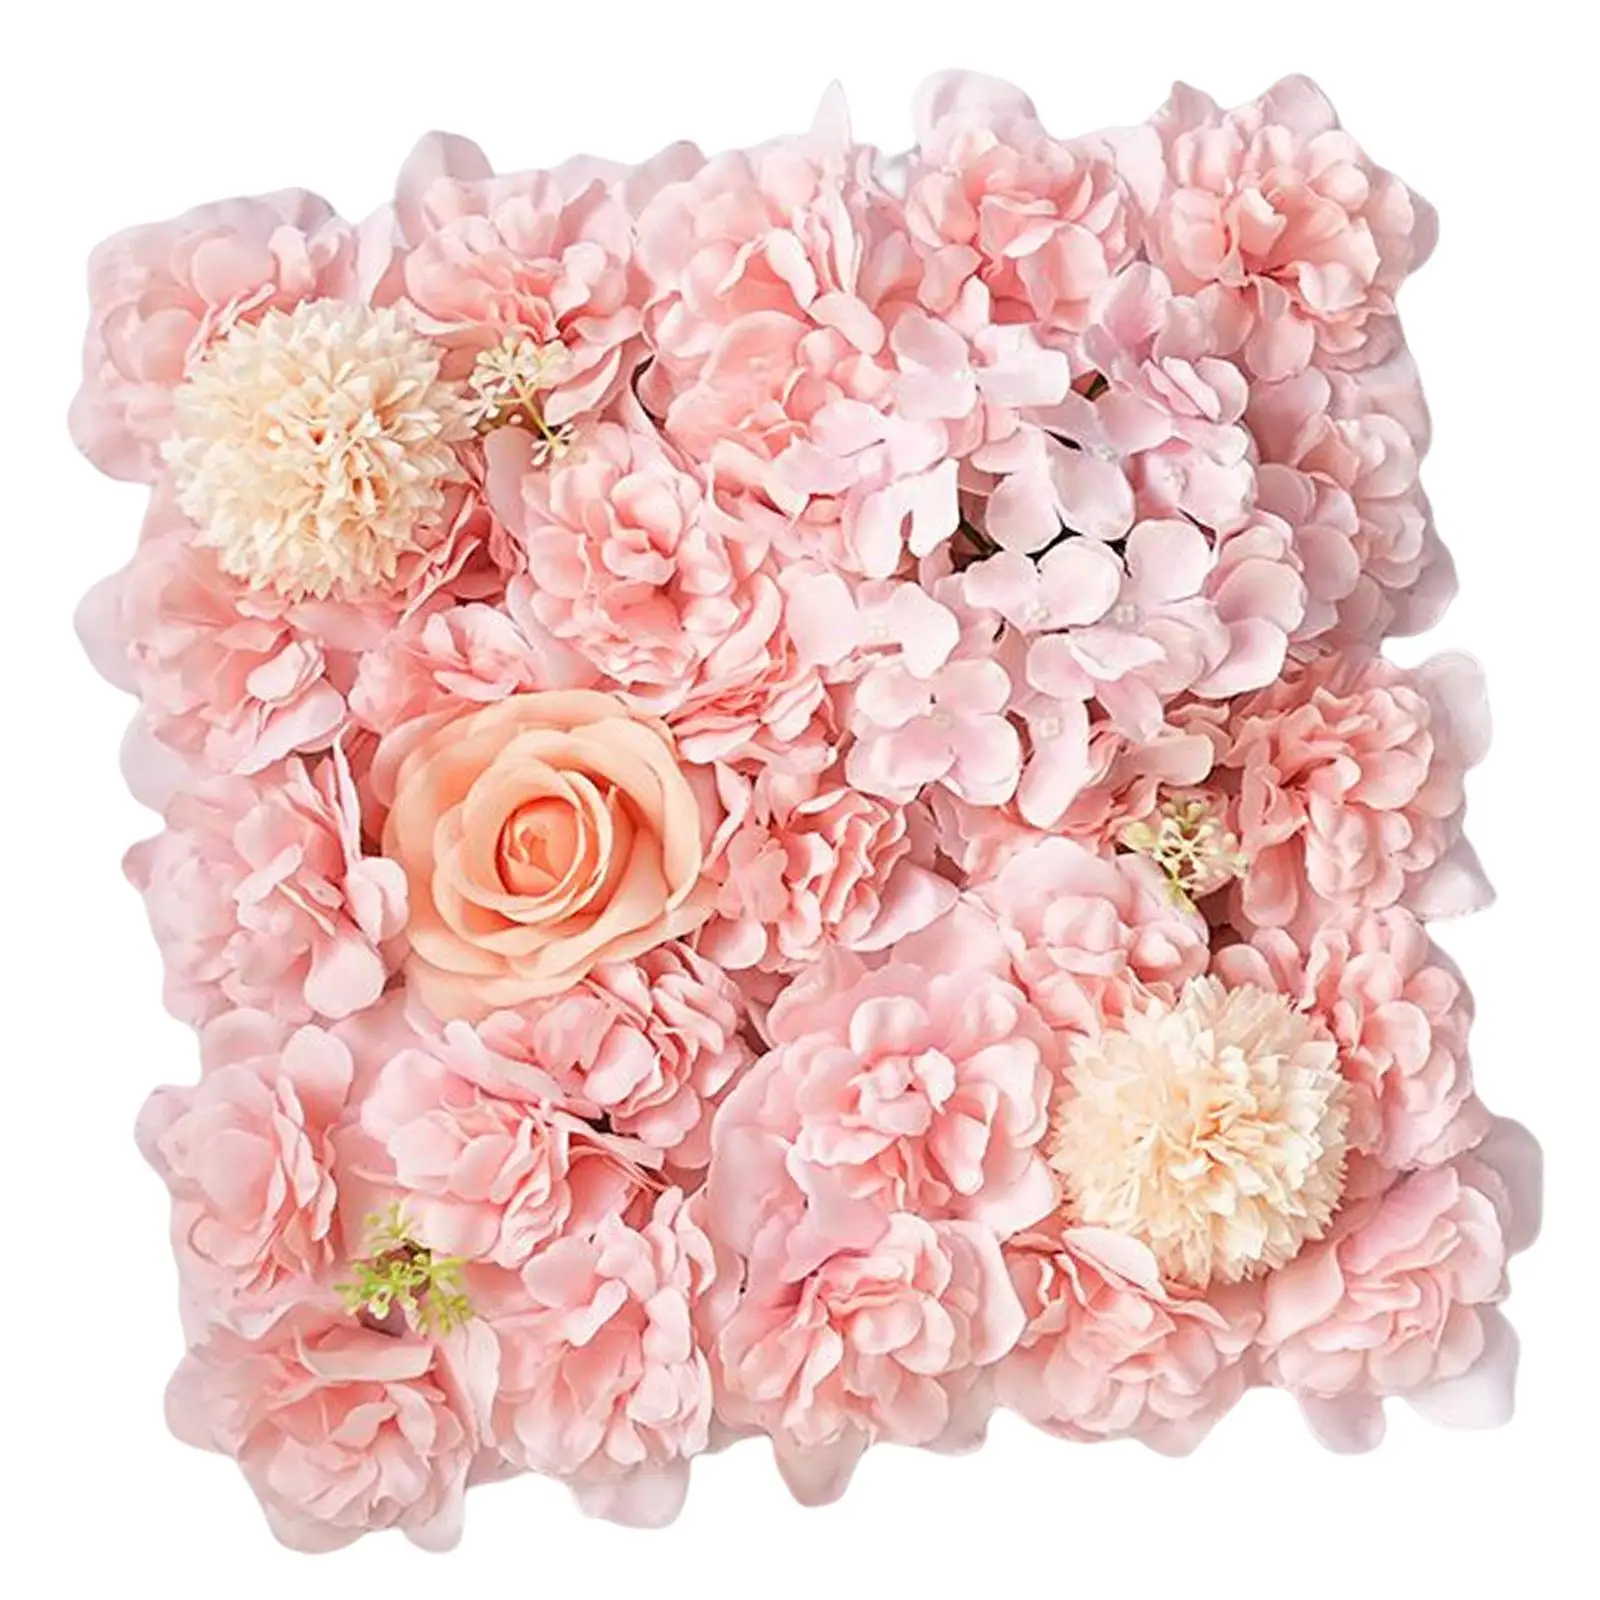 38Cmx38cm Artificial Flower Wall Panel, Romantic Silk Rose Floral Screen Hydrangea Backdrop for Wedding Party Stage Wall Decor